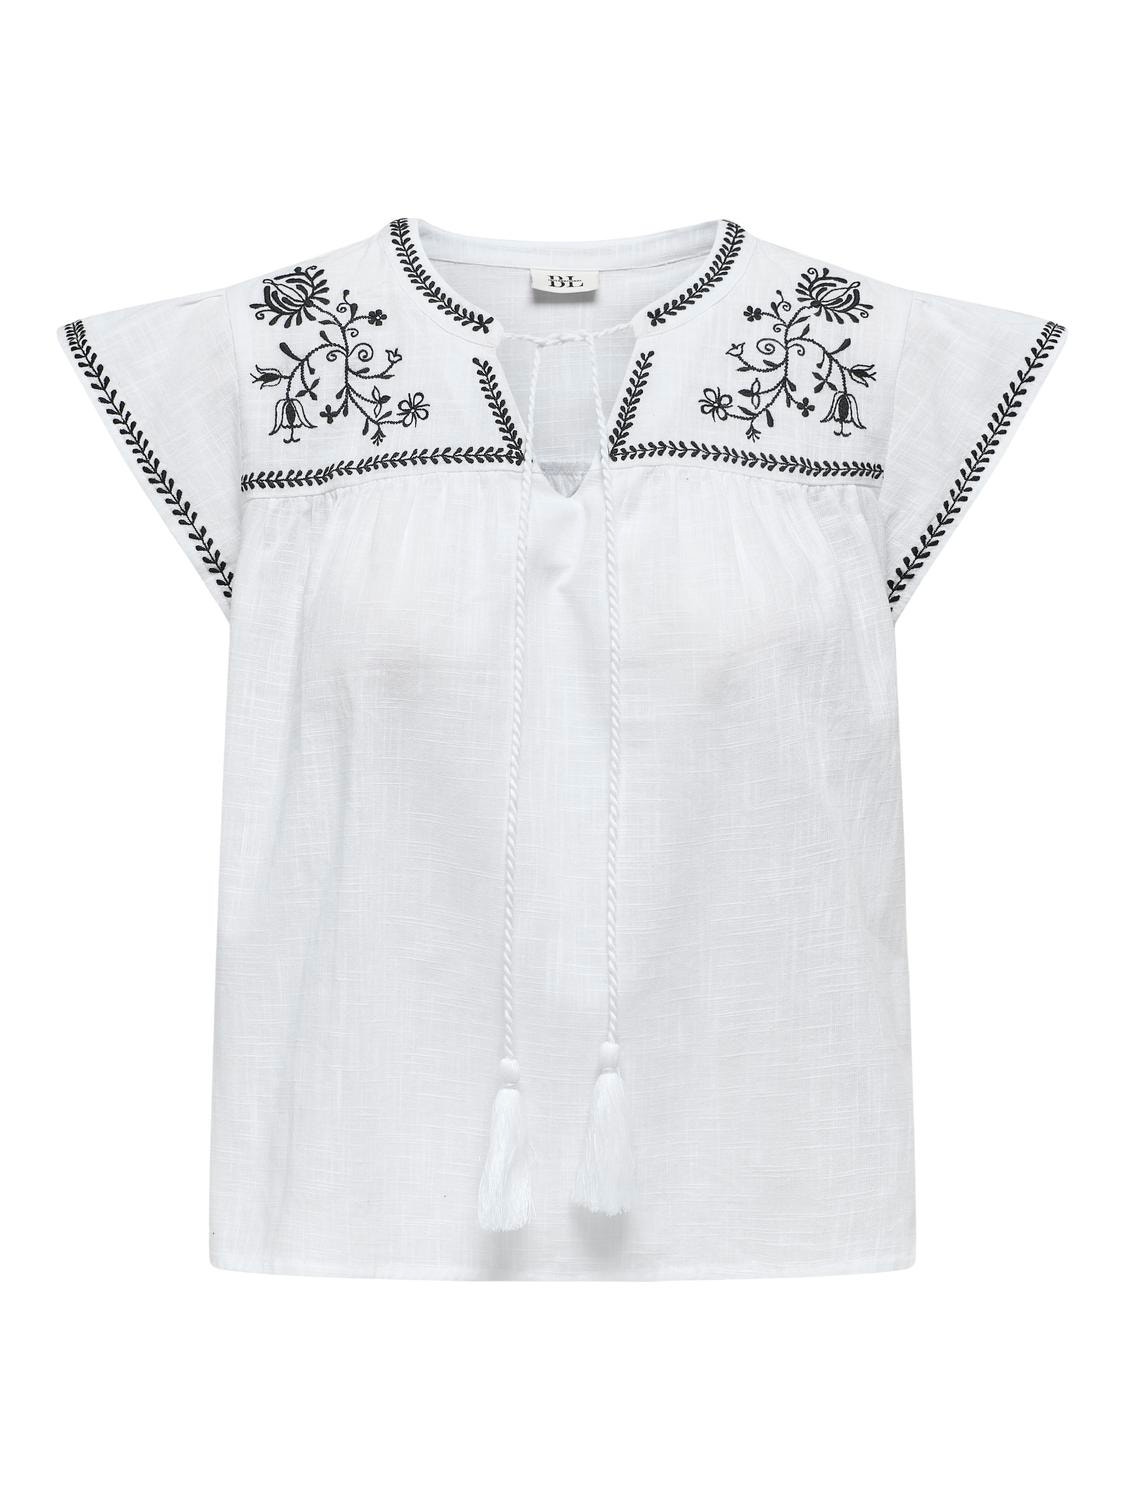 ONLY O-neck top with embroidery  -Cloud Dancer - 15342859